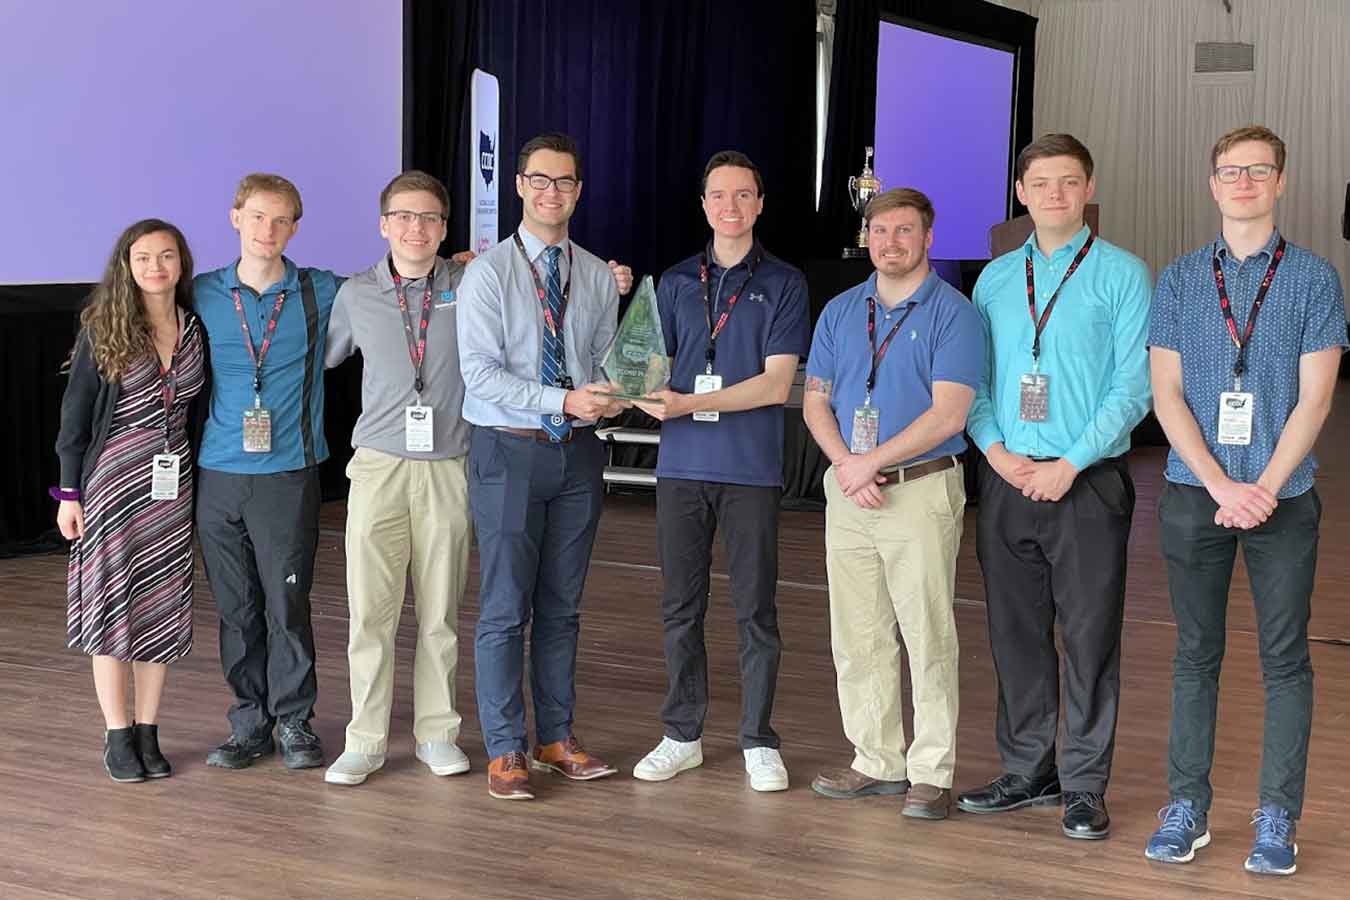 A team from DSU placed second in the NCCDC in April. Team members include Annabelle Klosterman (left), Gaelin Shupe, Tyler Thomas, Jackson Heiberger, Shane Donahue, Cody Mayer, Austen King, and Jacob Hince. 